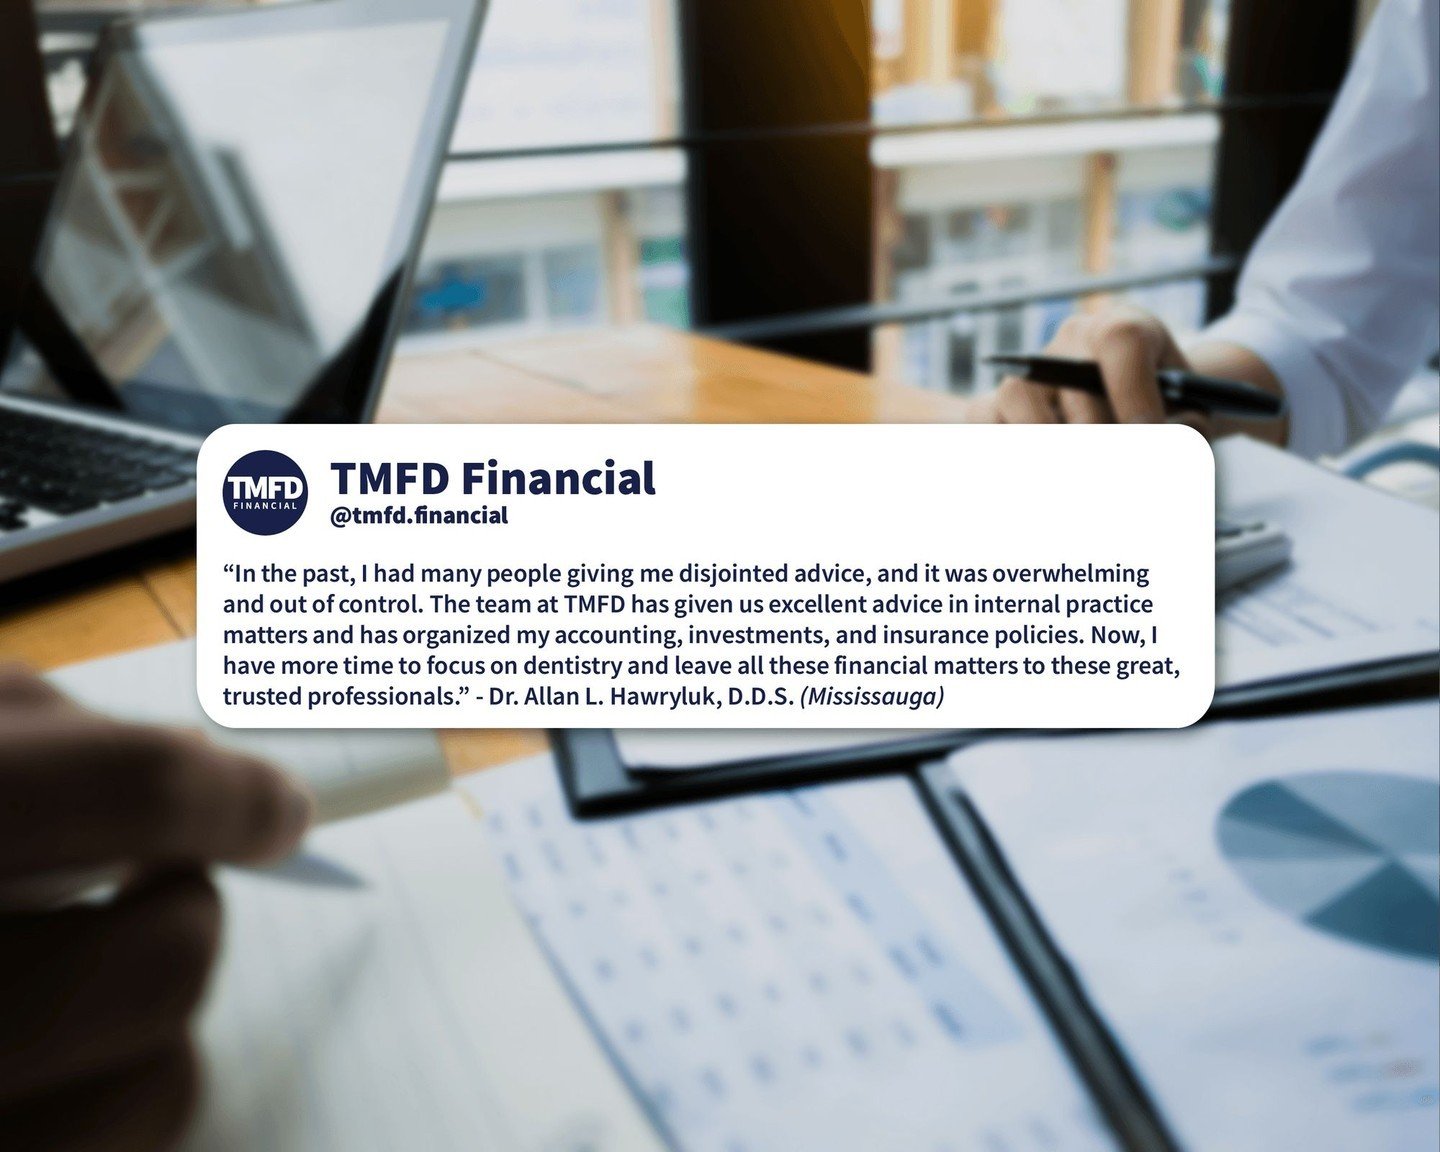 Thank you so much for your lovely words, Dr. Hawryluk! 

Our truest measure of success is client satisfaction, and we are thrilled to hear that we helped you fulfill your financial goals! 

Our team of financial professionals brings different areas o